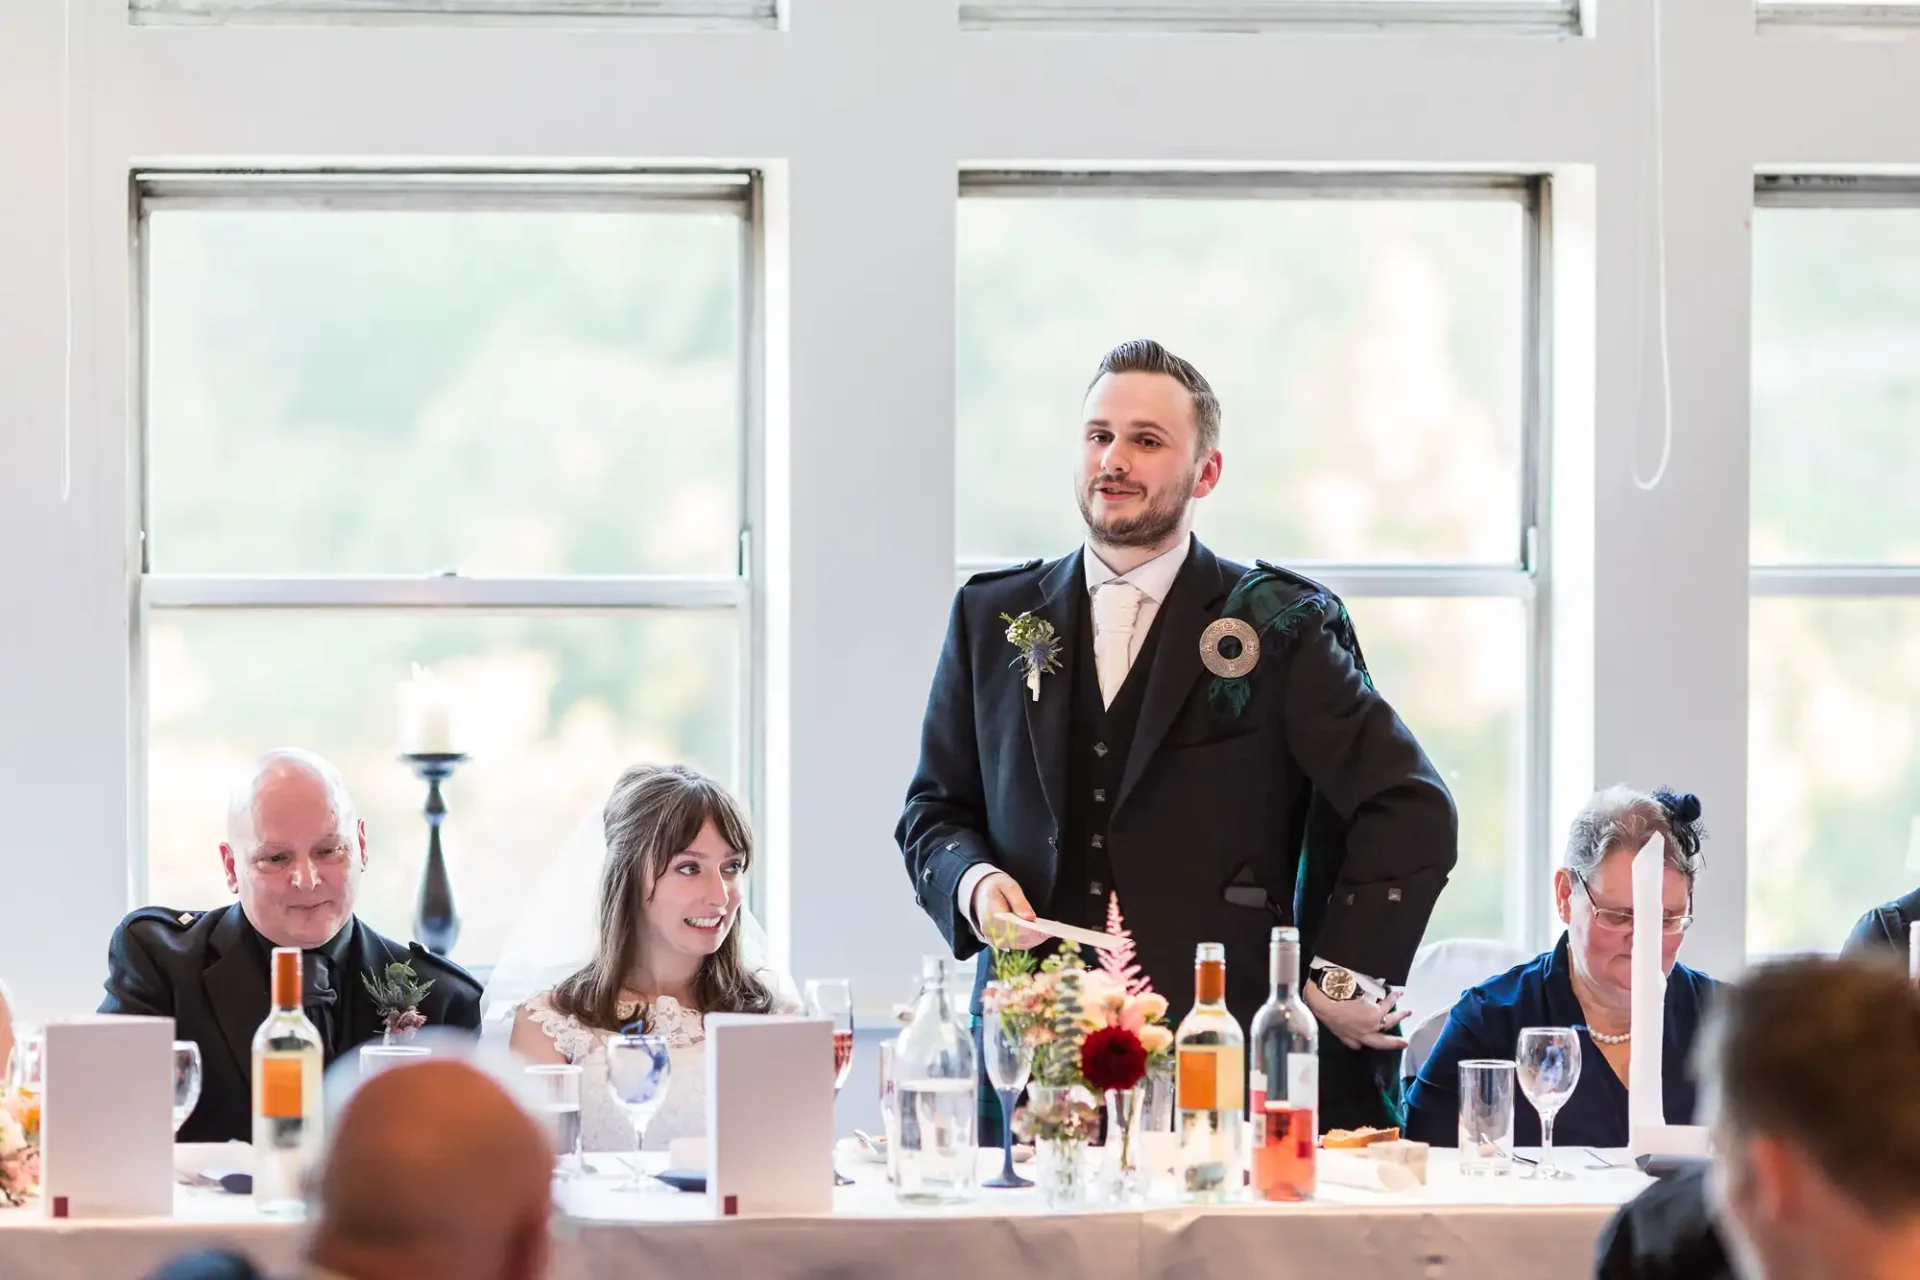 Man in suit standing and speaking at wedding reception table, with seated guests listening attentively.